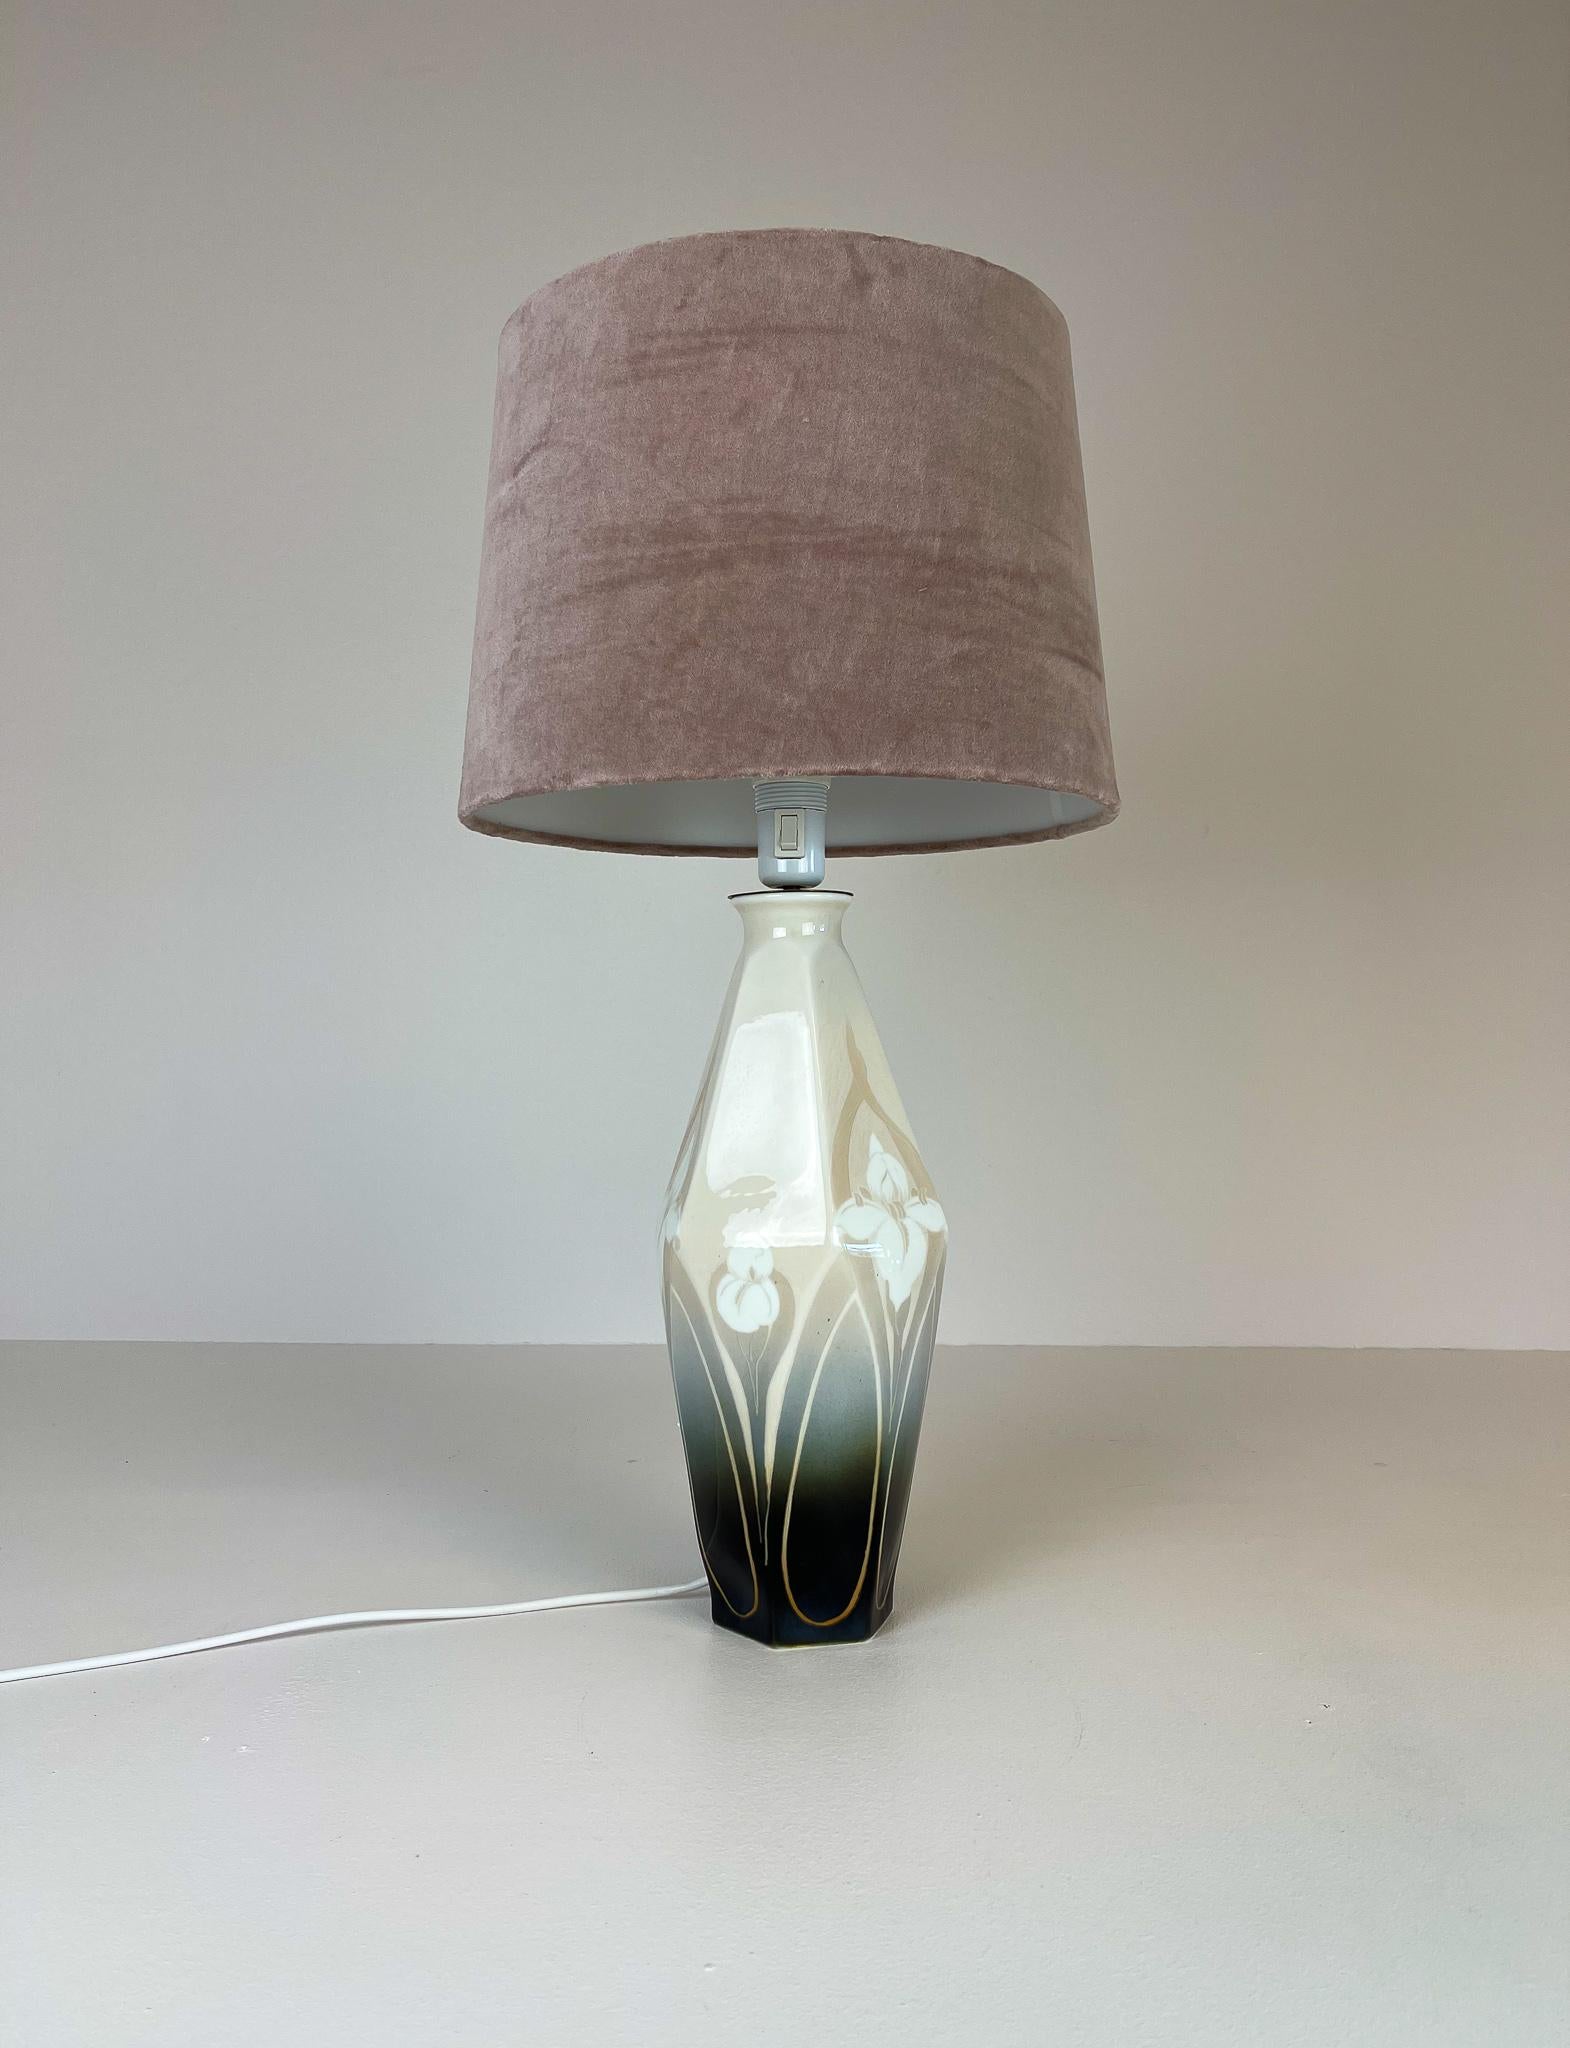 This rare table lamp was made in the begging at 1900. Made at Rörstrand factory and designed by Astrid Ewerlöf. The lamp has a wonderful shaped body with the typical Art Nouveau flowers. New shade in velvet. 

Good condition, rewired.

Measures: